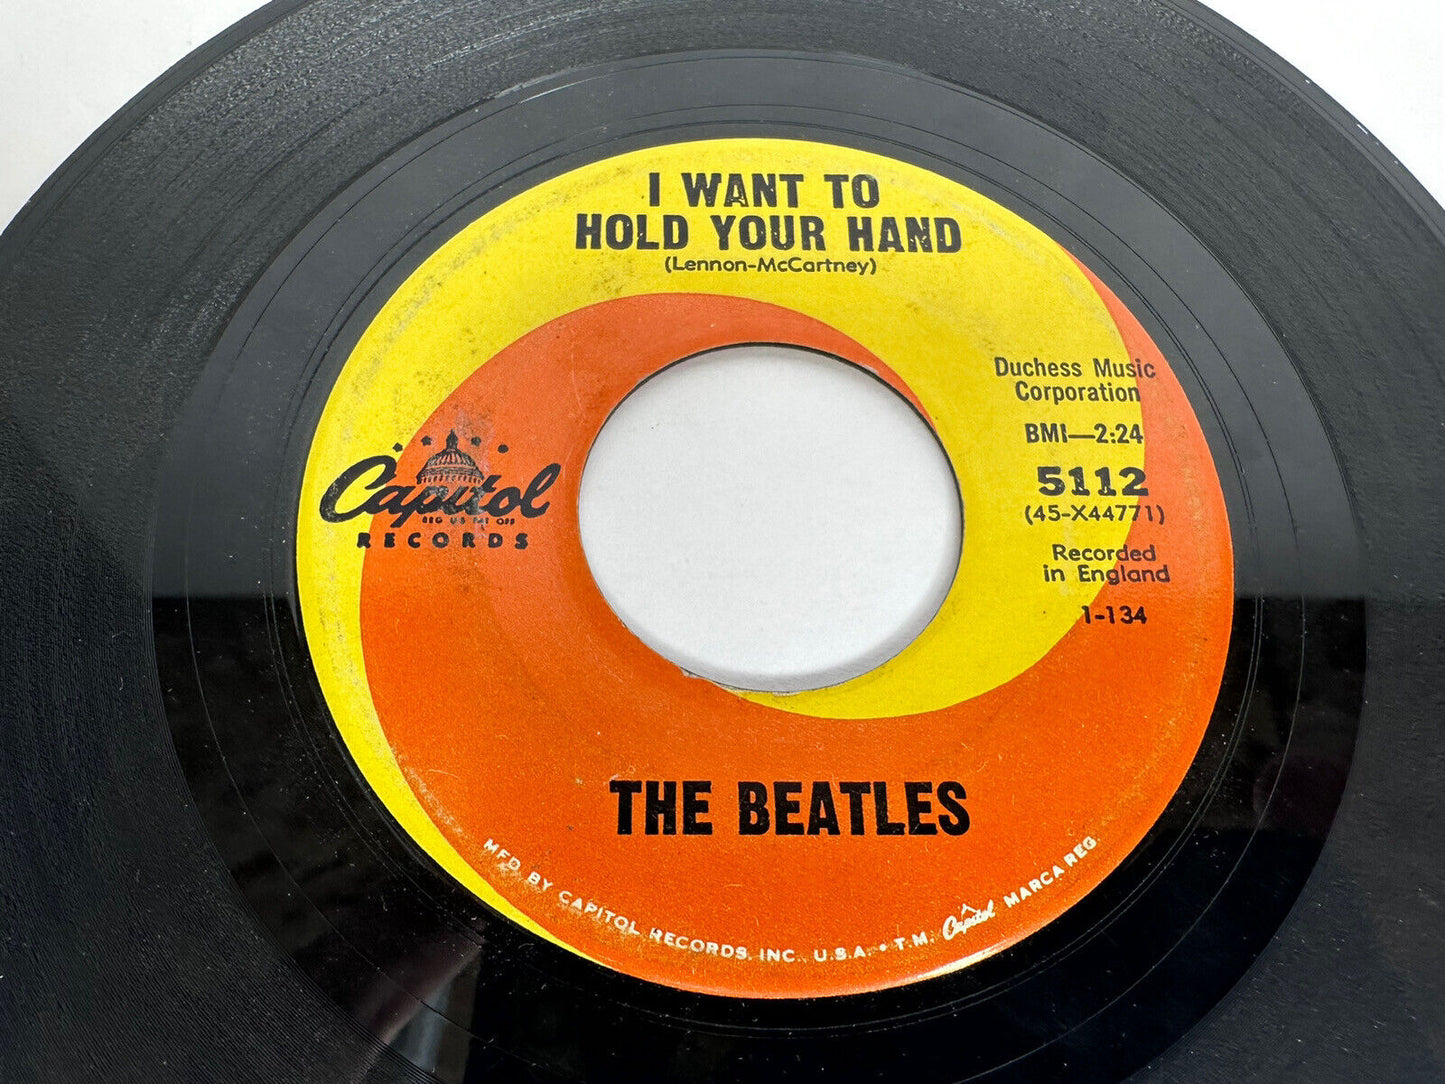 Vintage 1964 The Beatles "I Want to Hold Your Hand" / "I Saw Her Standing There" 45 RPM Vinyl Record - Capitol Records 5112 - TreasuTiques